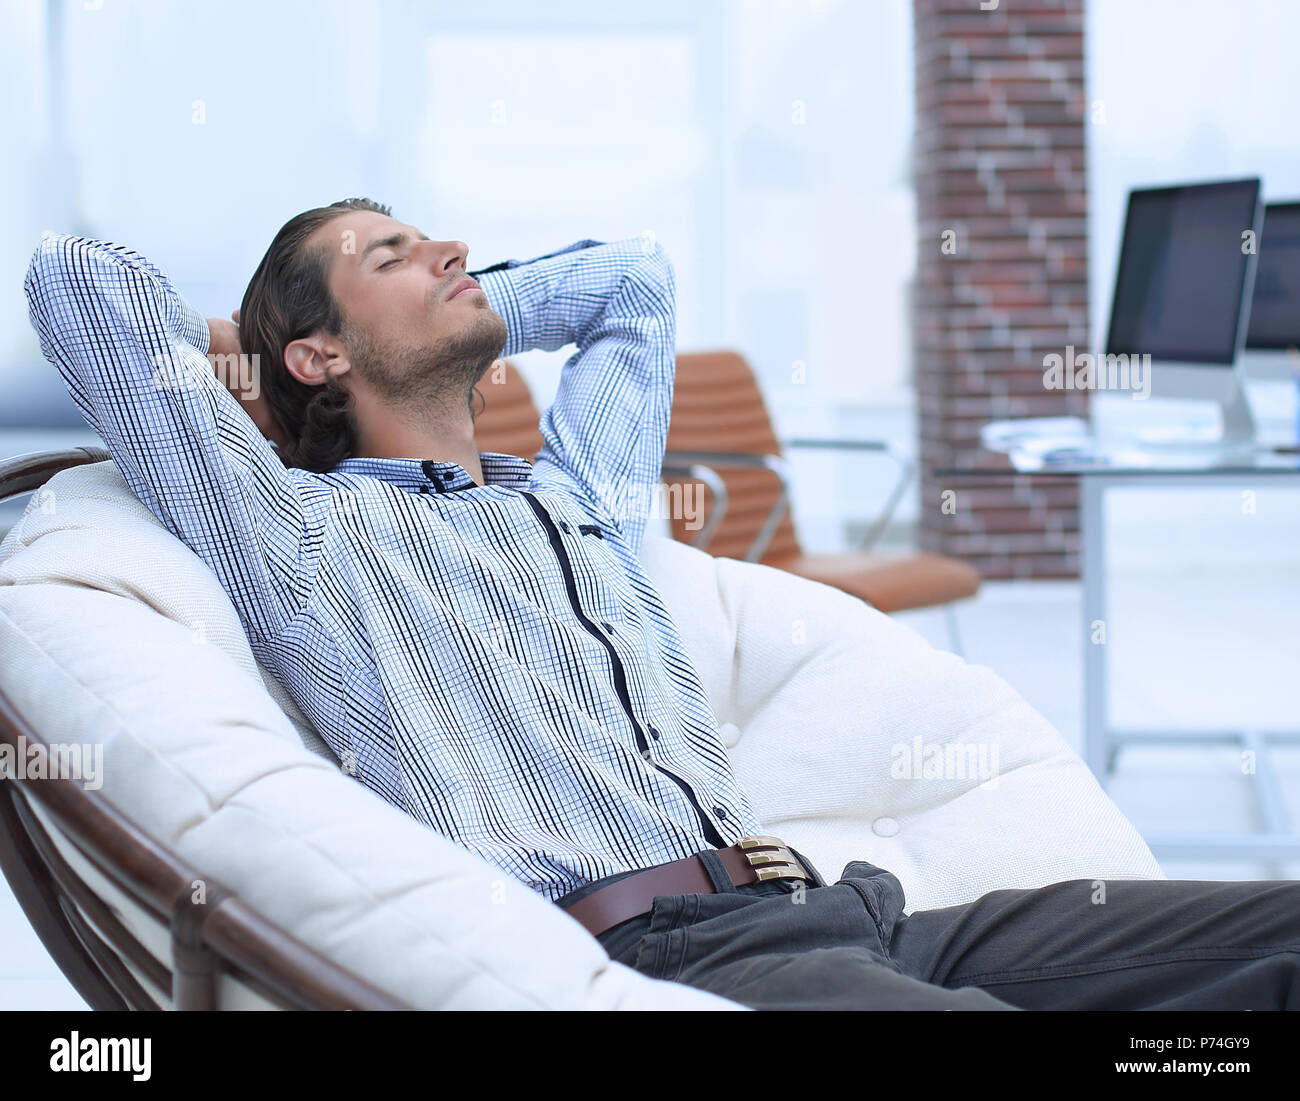 businessman relaxing in a comfortable chair Stock Photo - Alamy